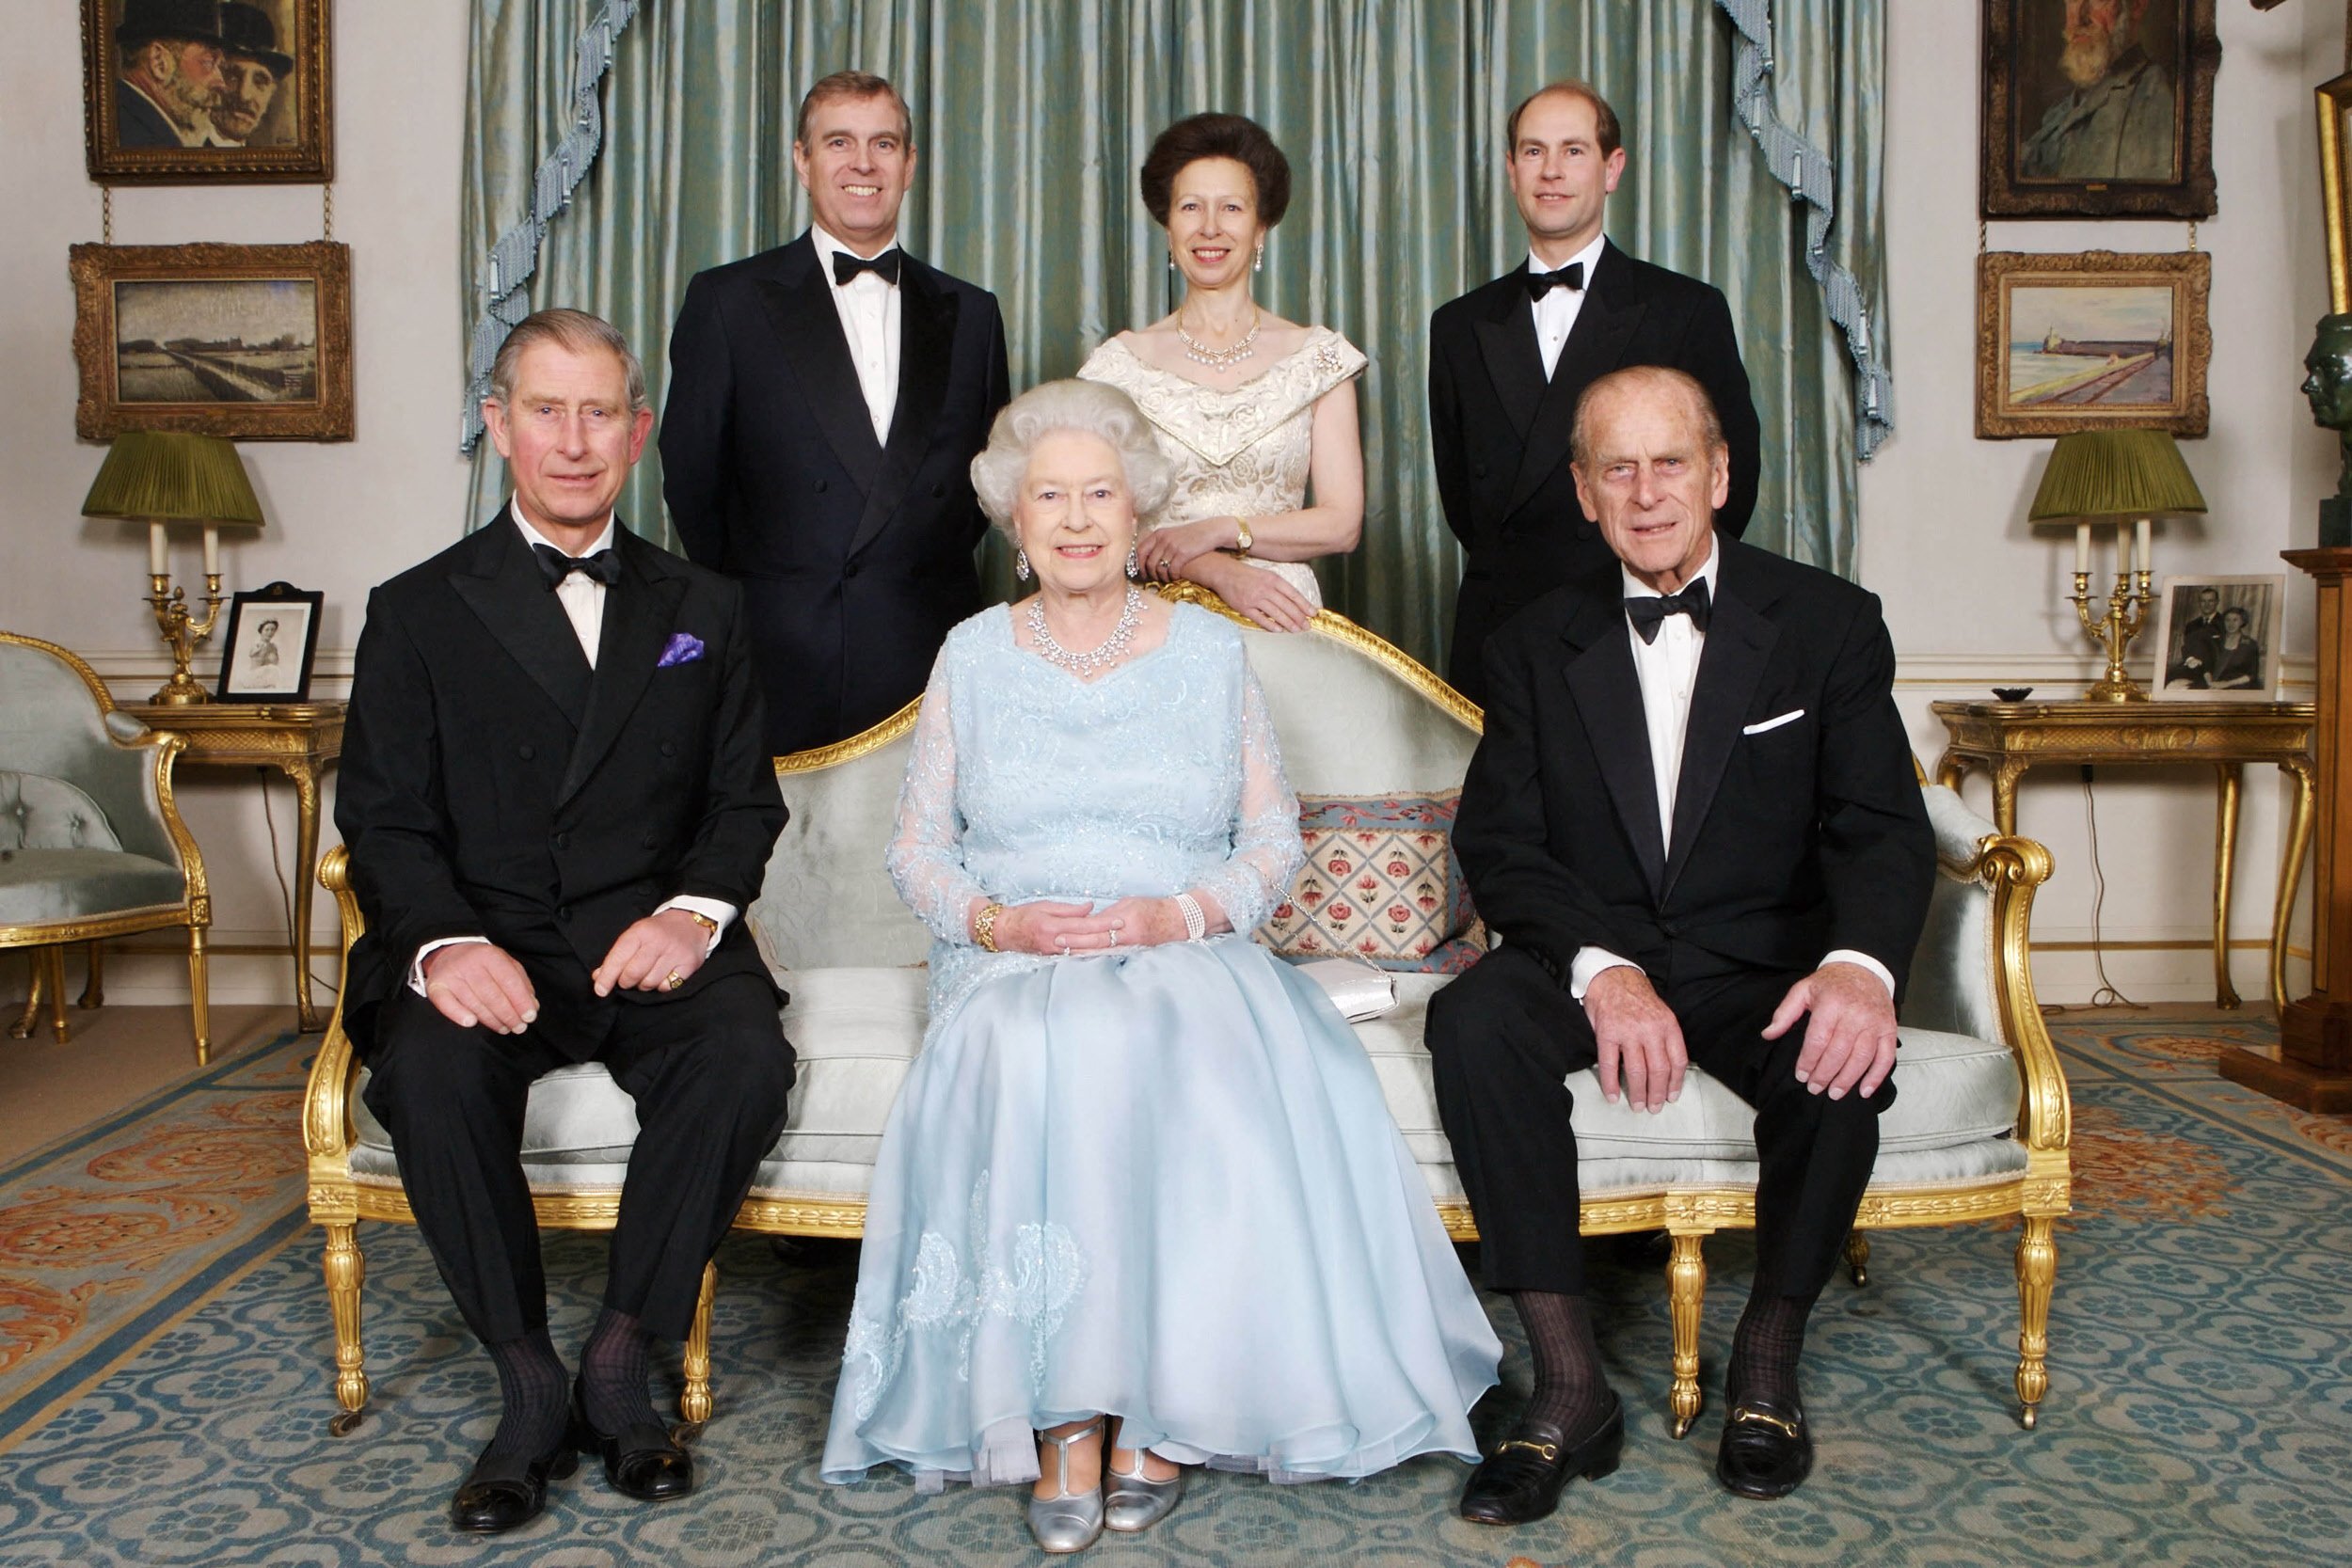 Queen Elizabeth II and Prince Philip are joined at Clarence House in London by Prince Charles, Prince Edward, Princess Anne, and Prince Andrew on the occasion of a dinner hosted by HRH The Prince of Wales and HRH The Duchess of Cornwall to mark the forthcoming Diamond Wedding Anniversary of The Queen and The Duke, 18 November 2007. | Source: Getty Images